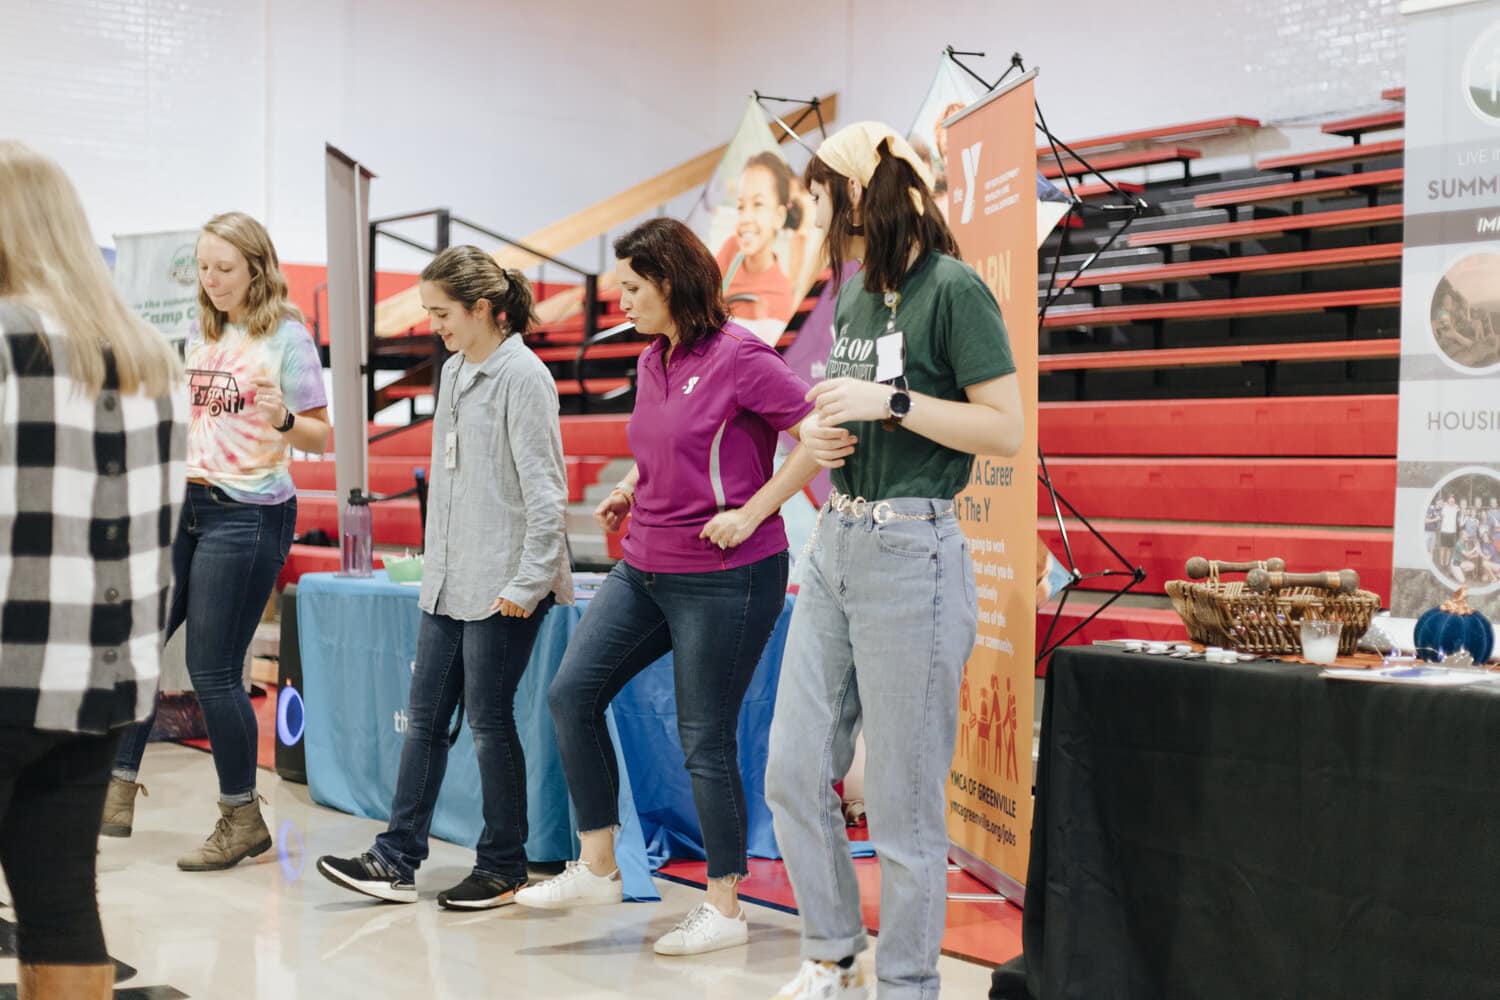 The camp fair wasn’t just informative, but it was fun. Multiple camp representatives were caught doing the cotton eye joe together.